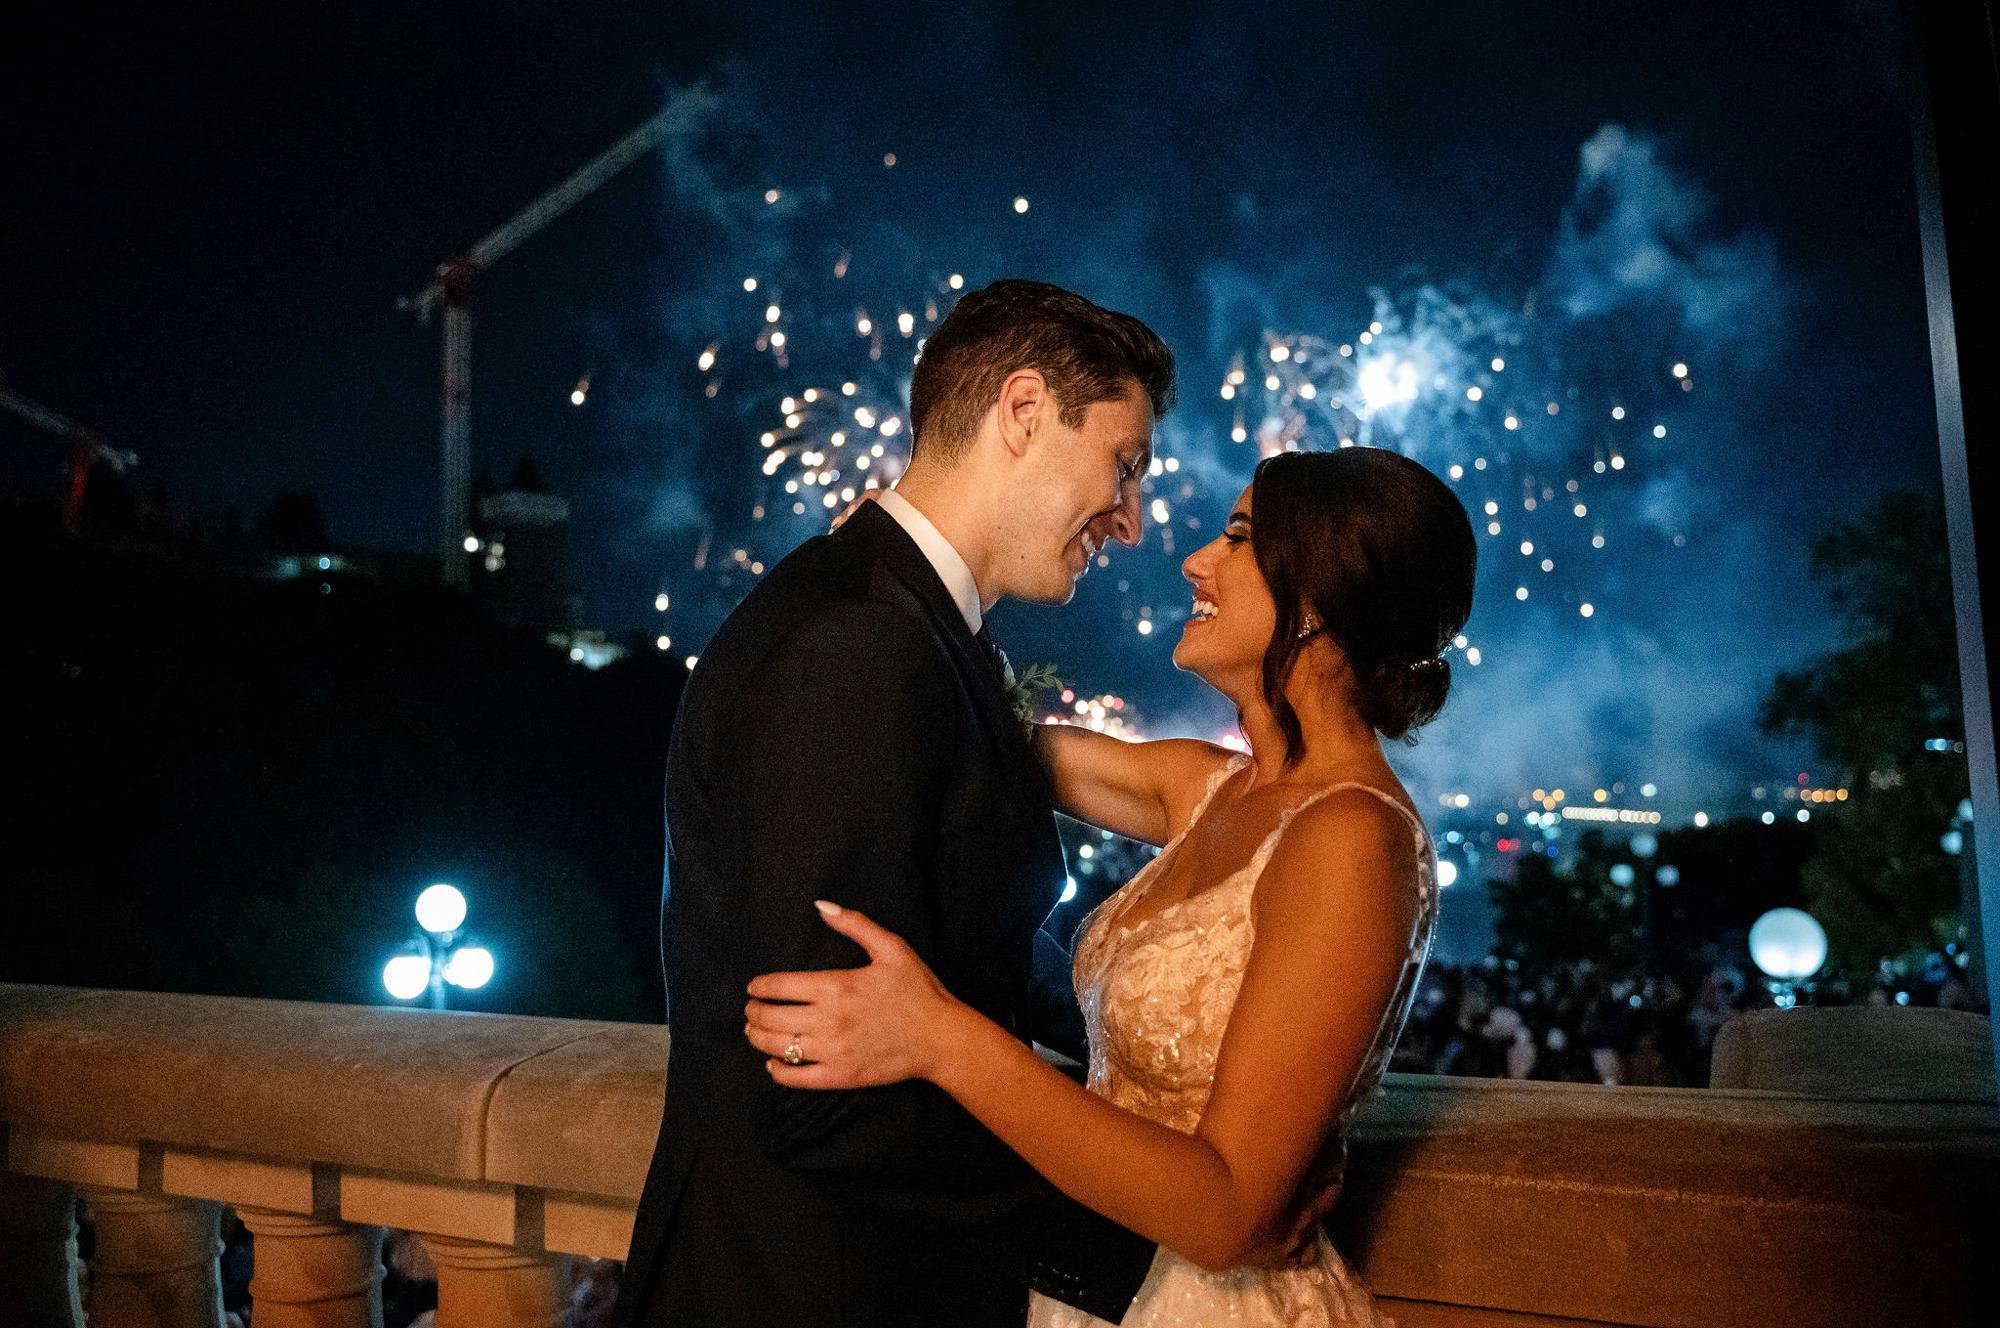 photo from a chateau Laurier ballroom wedding with fireworks in the background